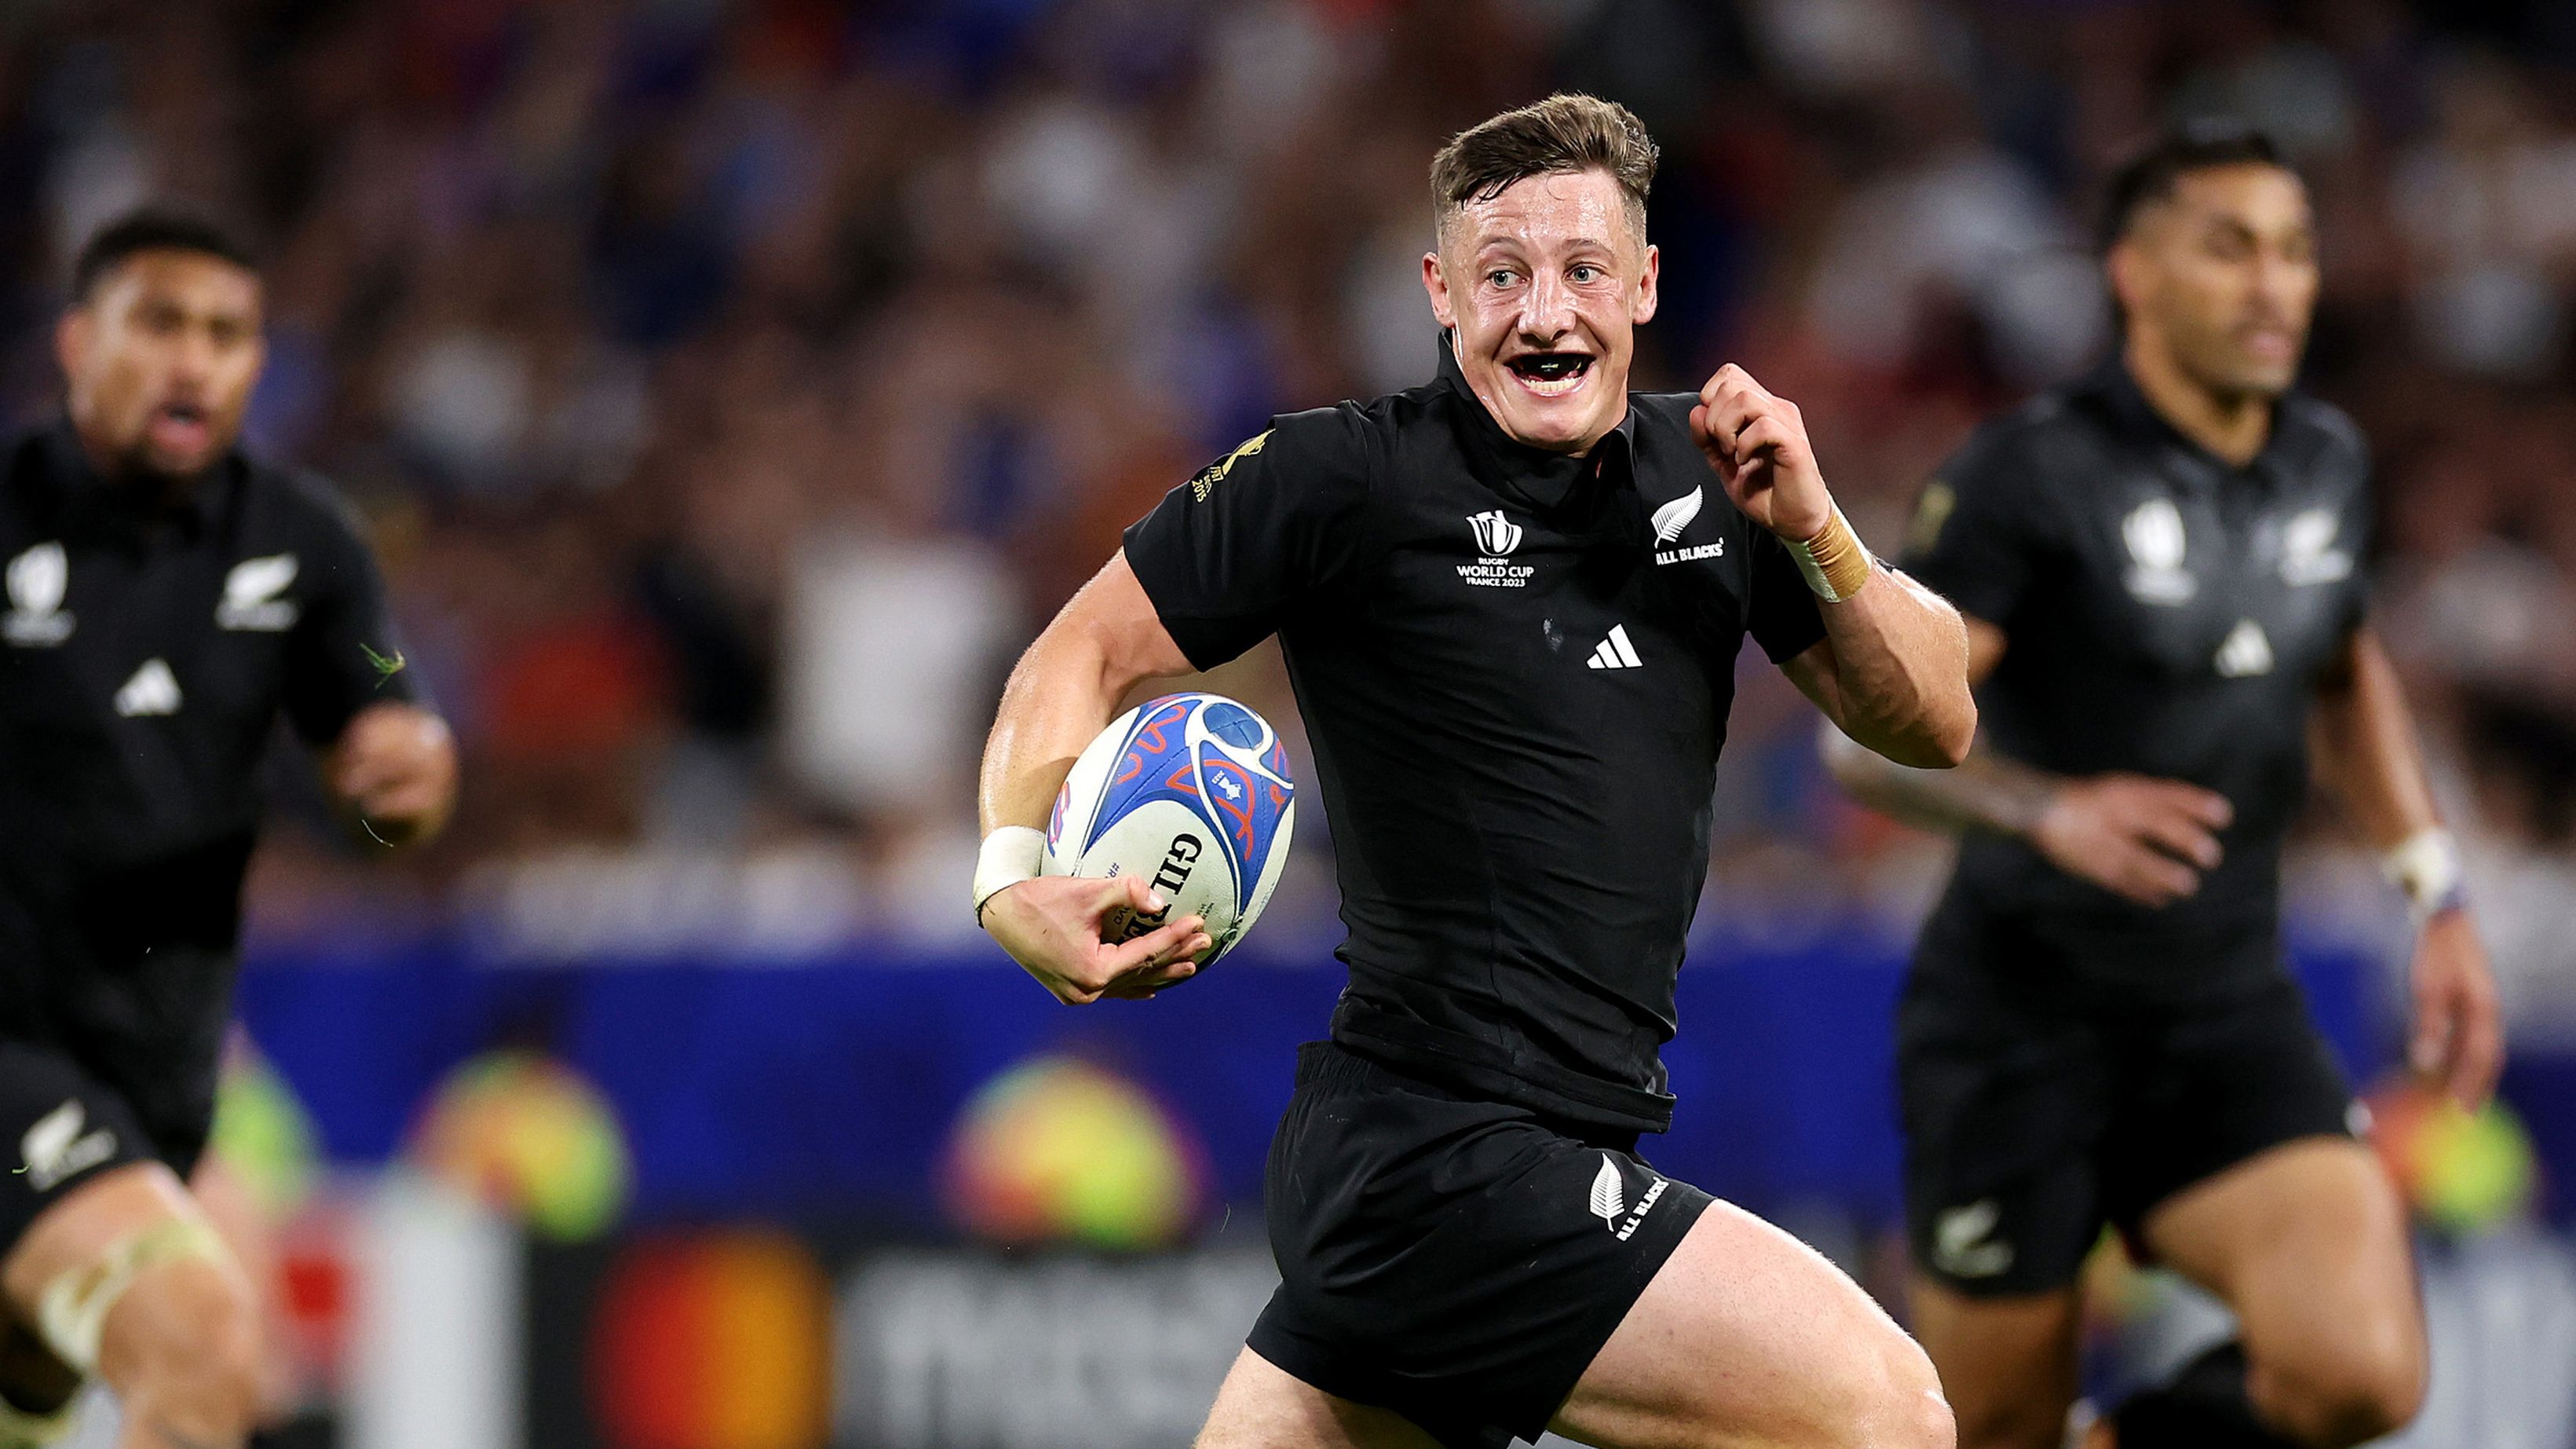 Cam Roigard of New Zealand runs with the ball.